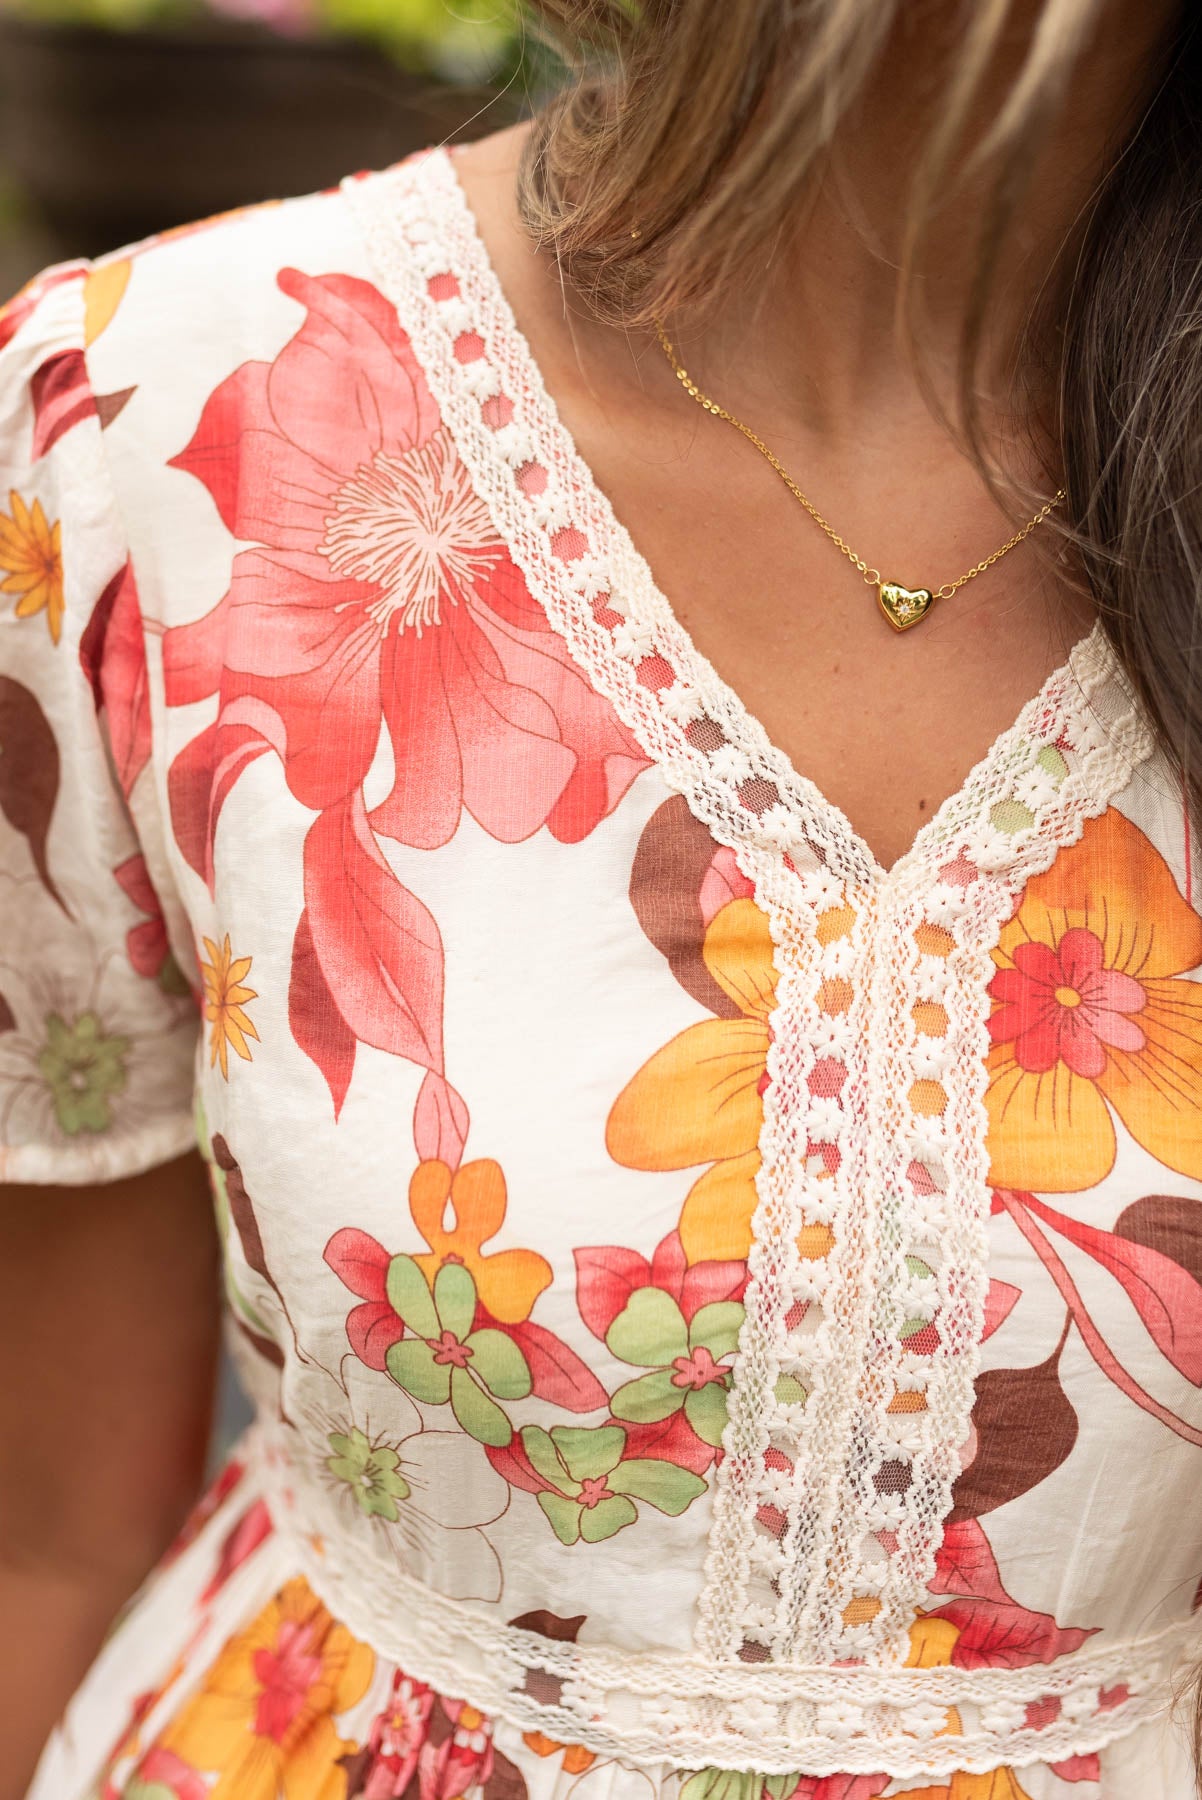 Close up of the floral pattern and lace on the red multi floral tiered dress